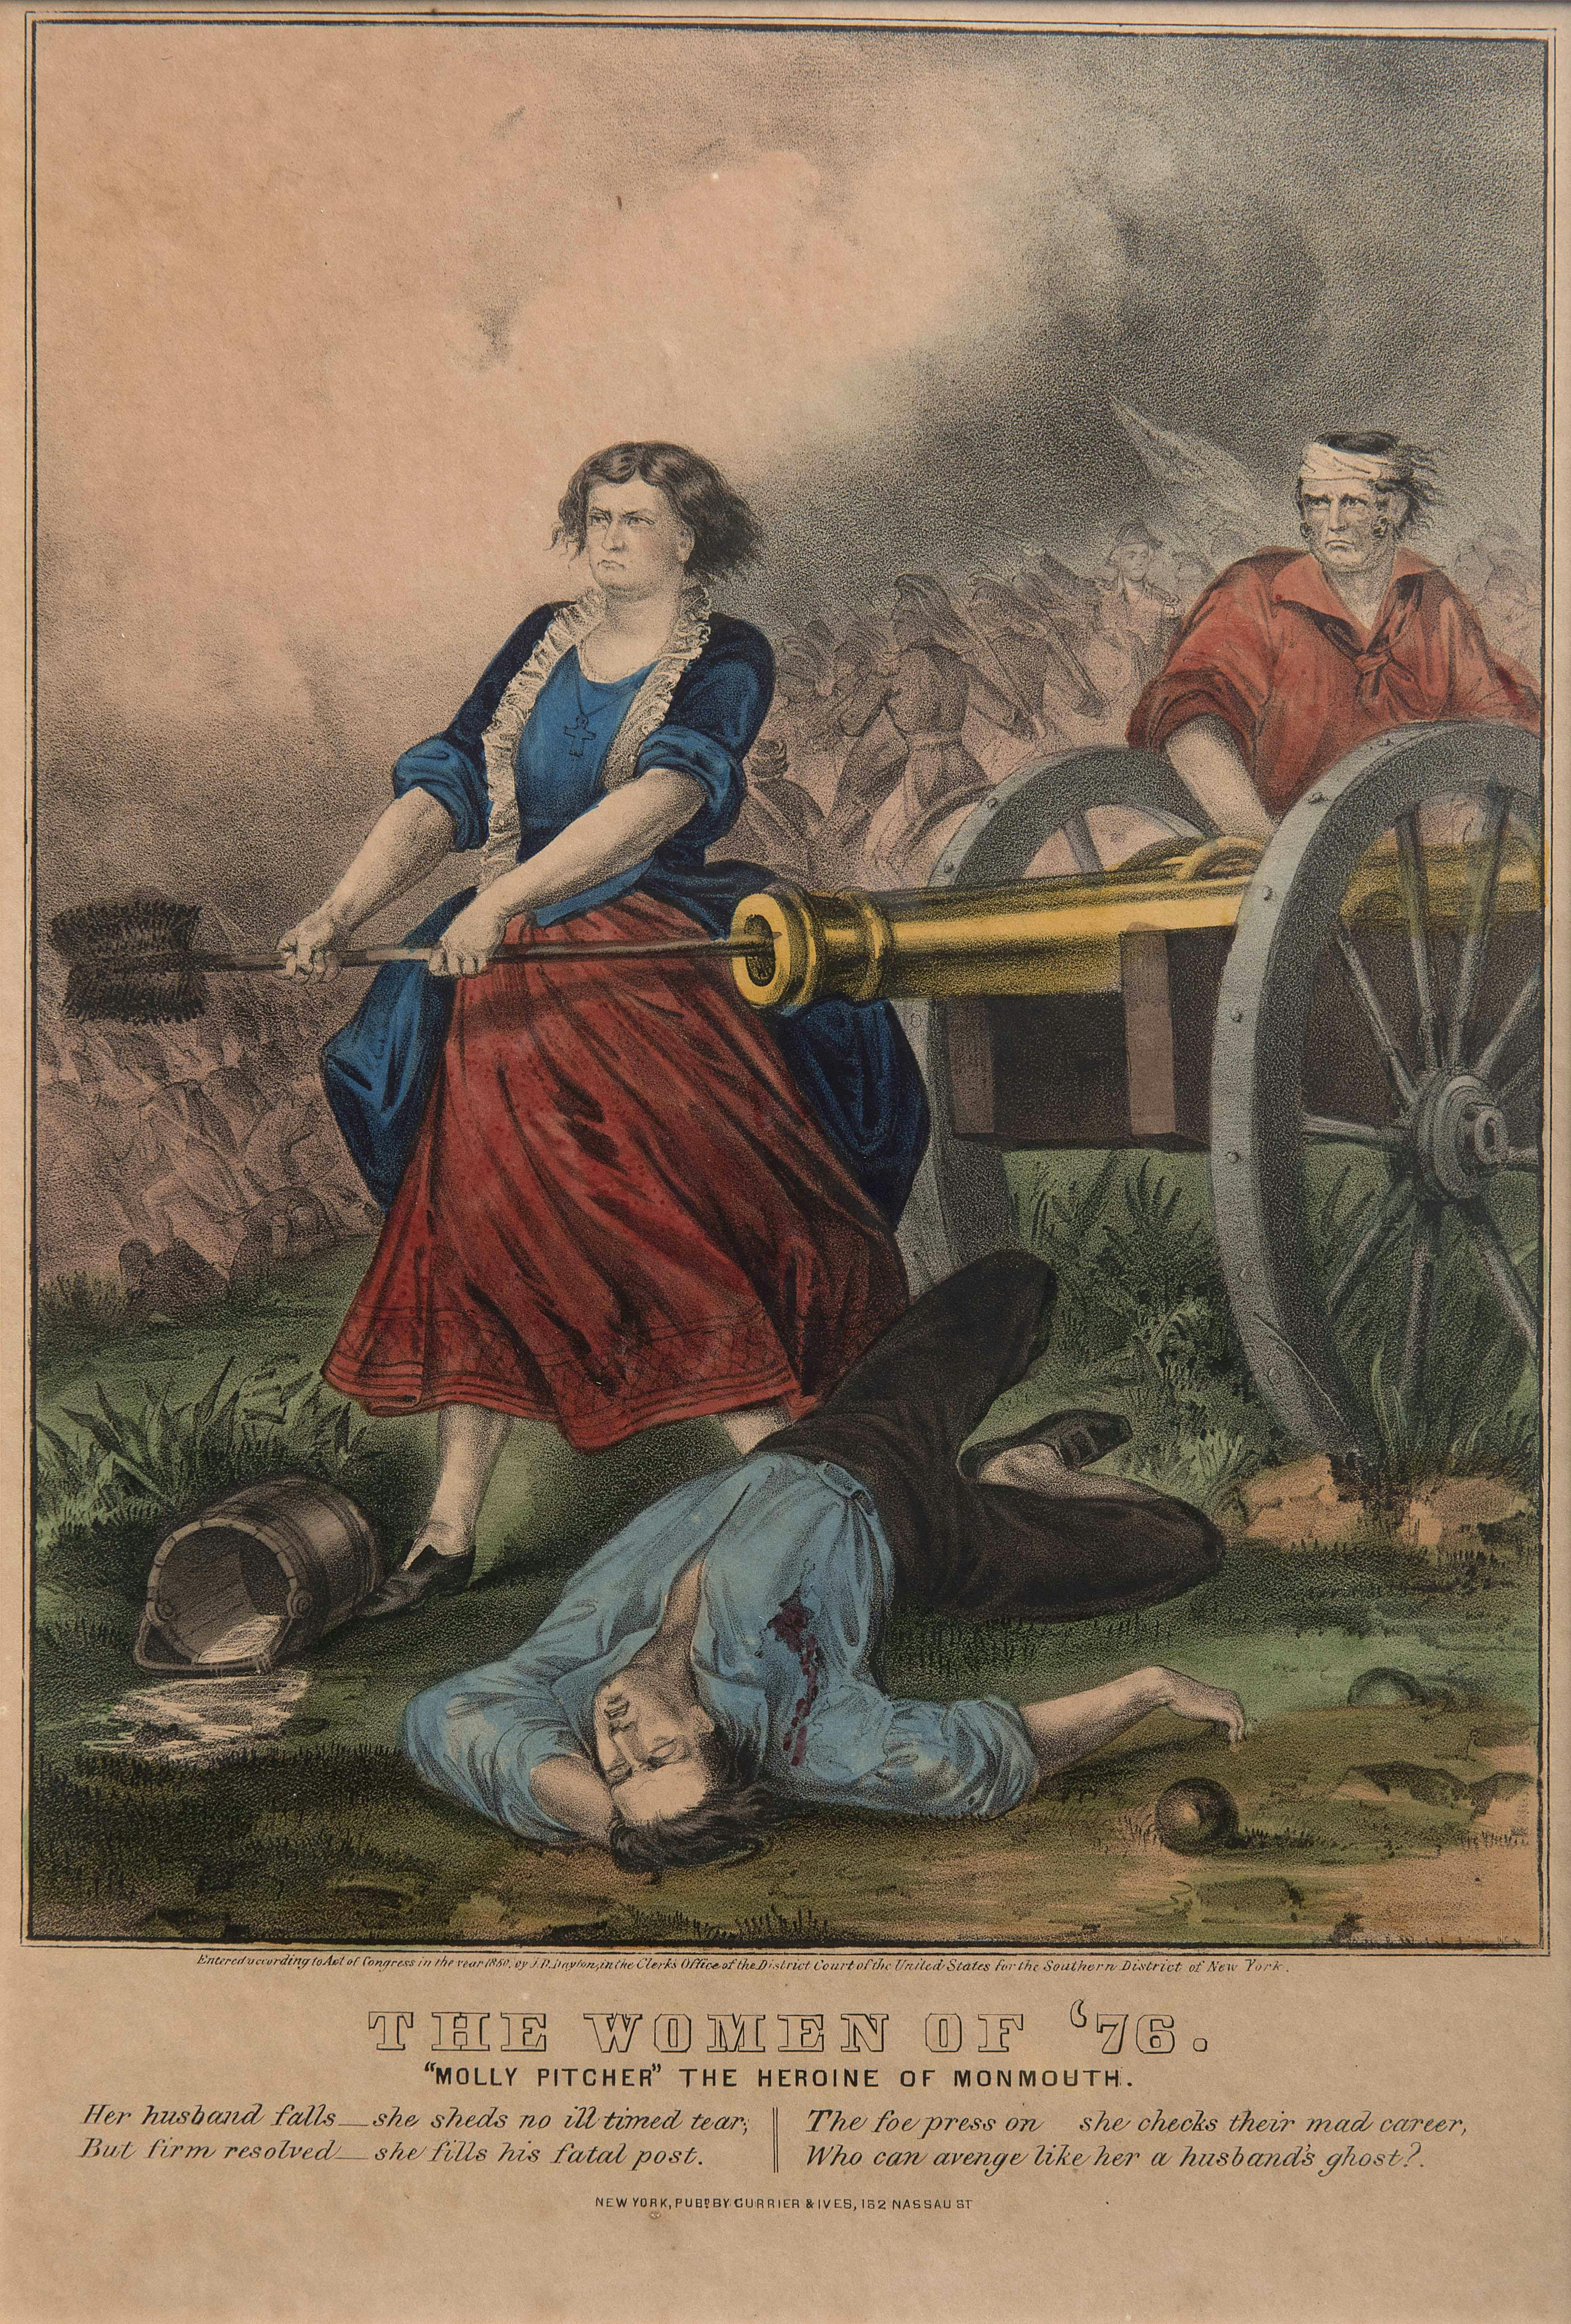 Painting of The Heroine of Monmouth (Molly Pitcher, 1876)